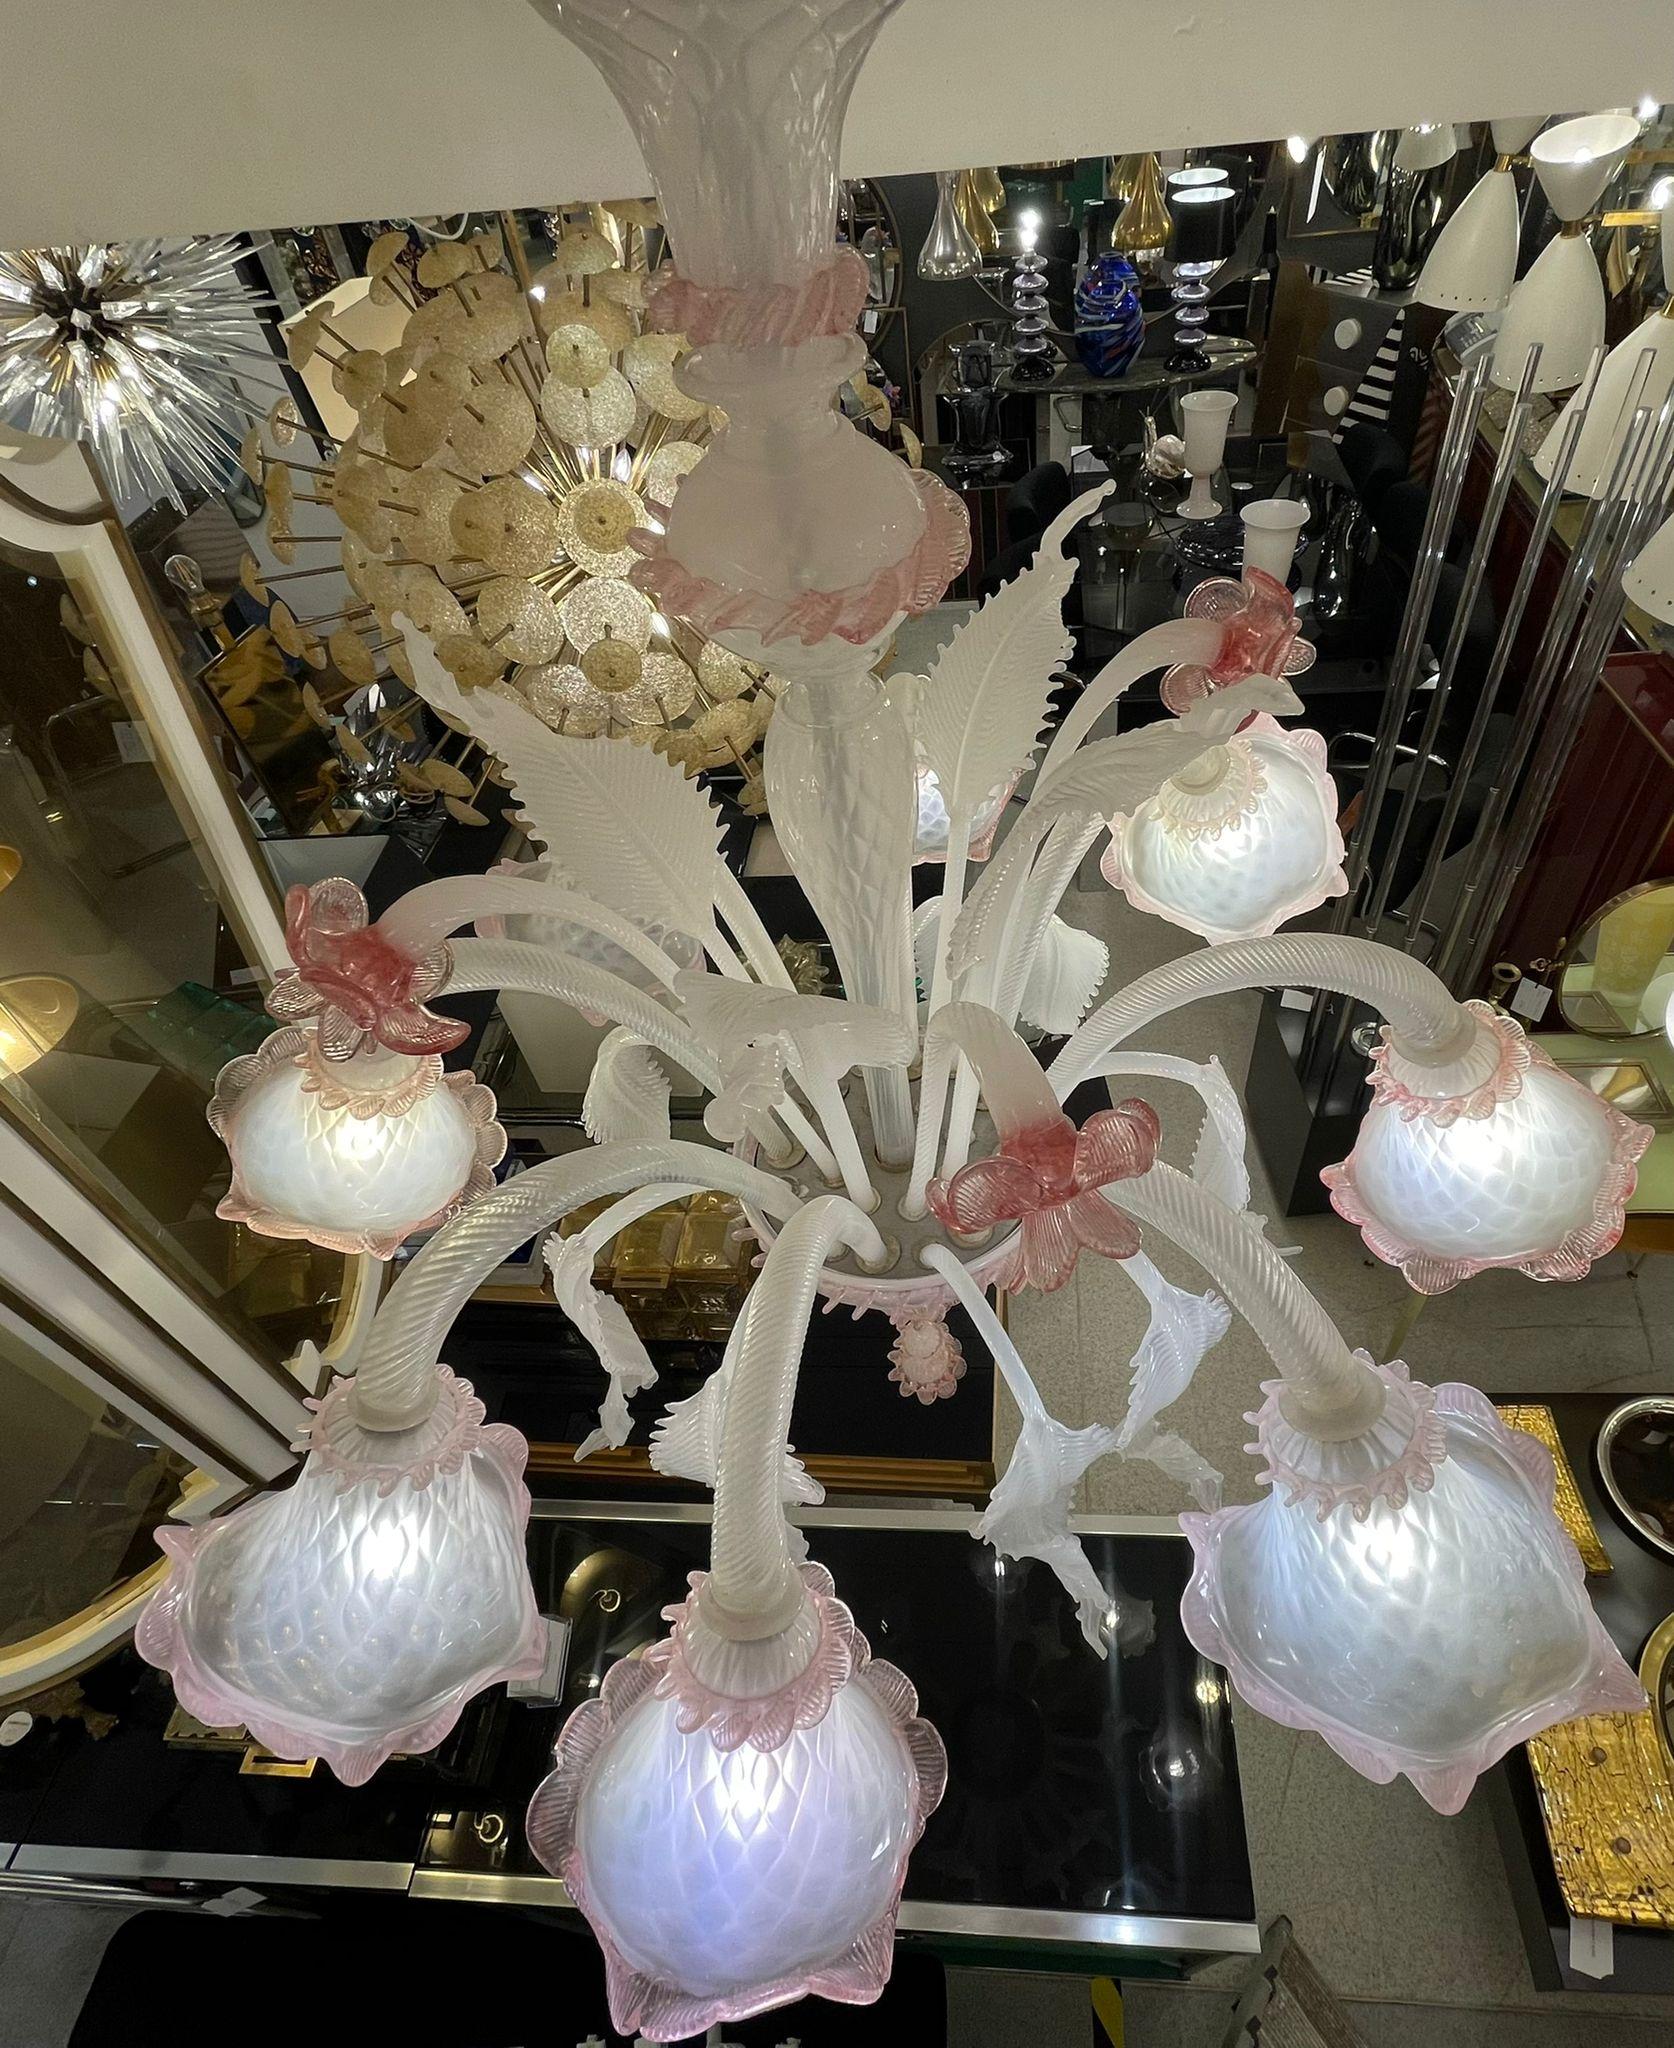 Murano chandelier 8 arms, pink vitreous paste flowers and leaves, details in pink and white. It is an evergreen model. The Murano glass techniques are a pride not only for the Venice area, but also for the entire made in Italy sector. The arms of